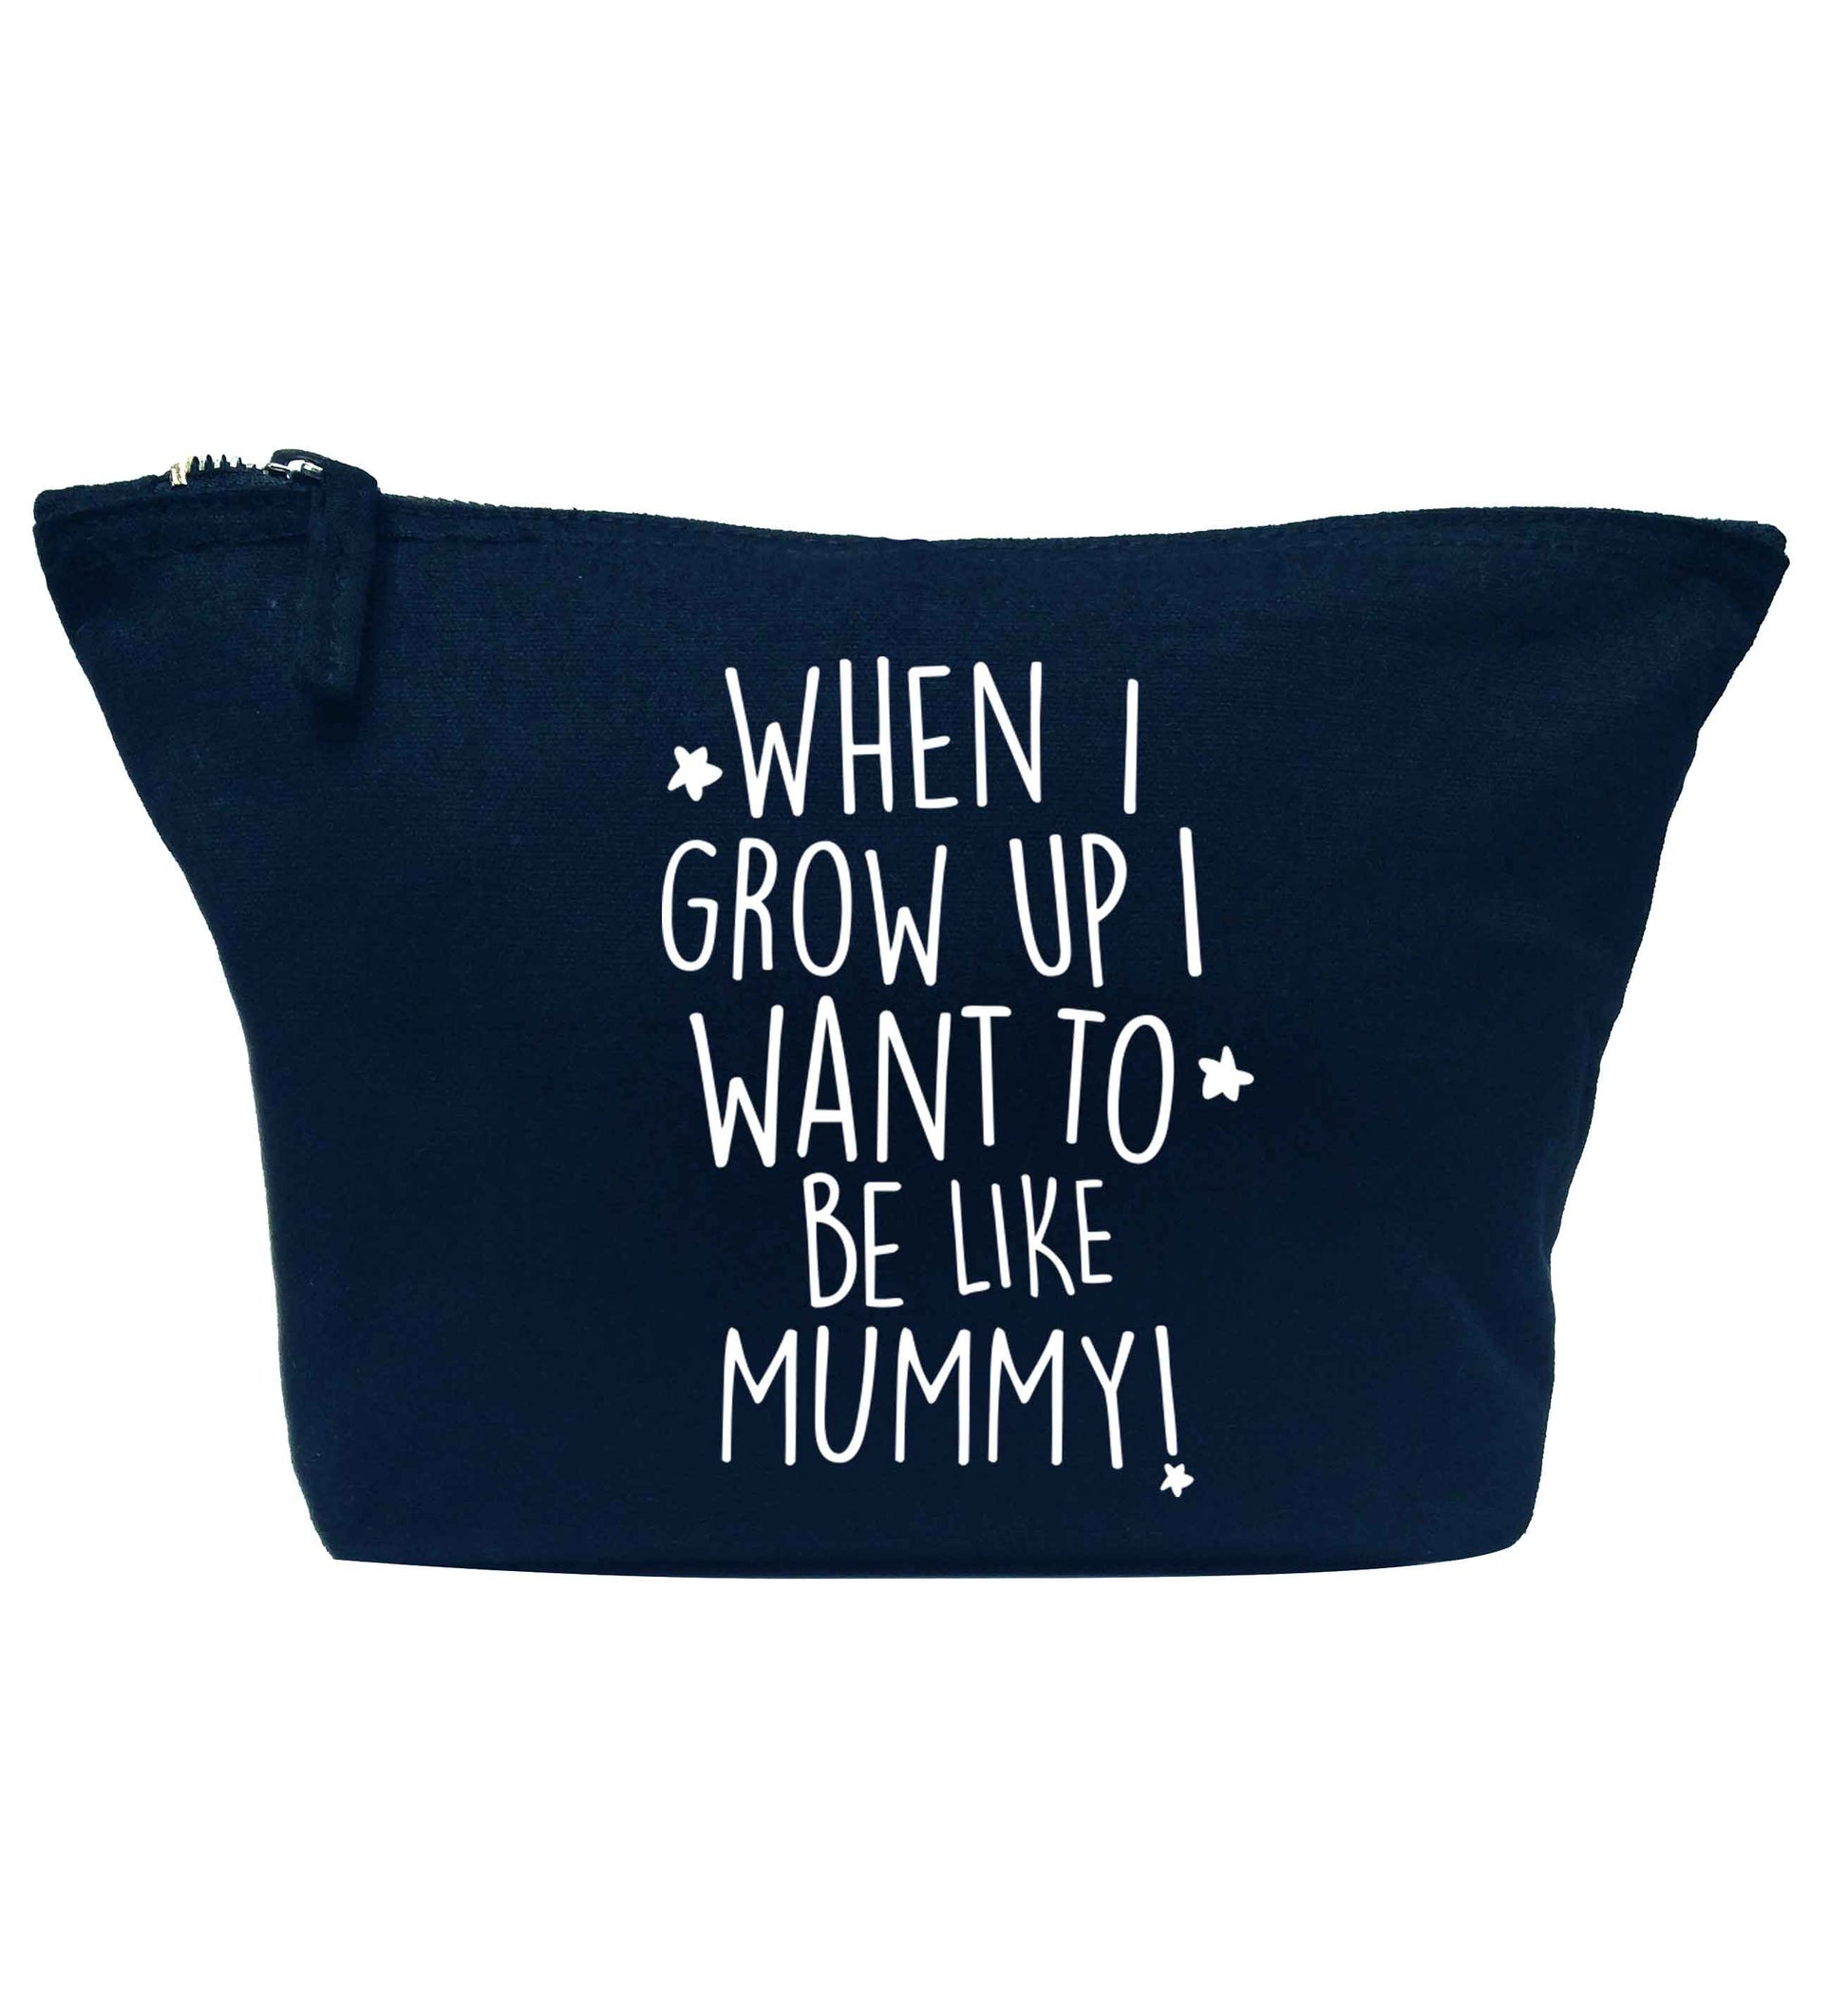 When I grow up I want to be like my mummy navy makeup bag